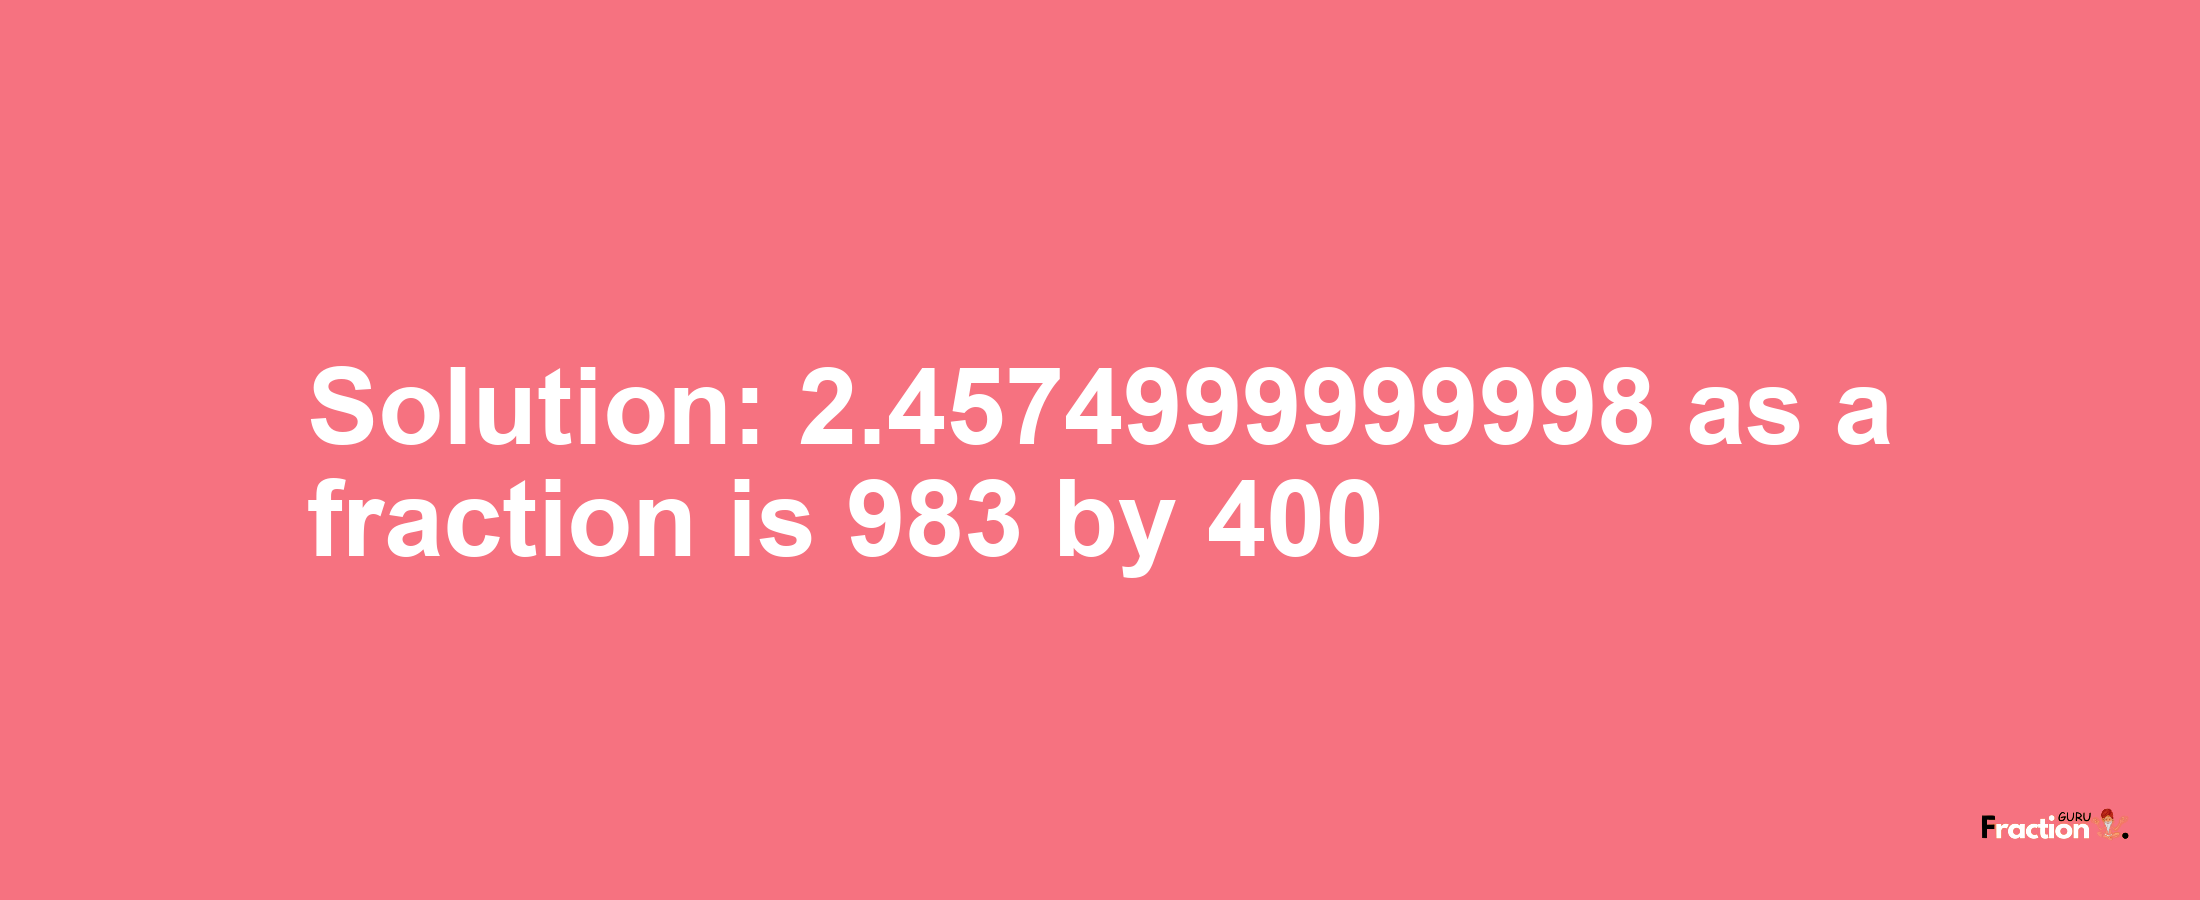 Solution:2.4574999999998 as a fraction is 983/400